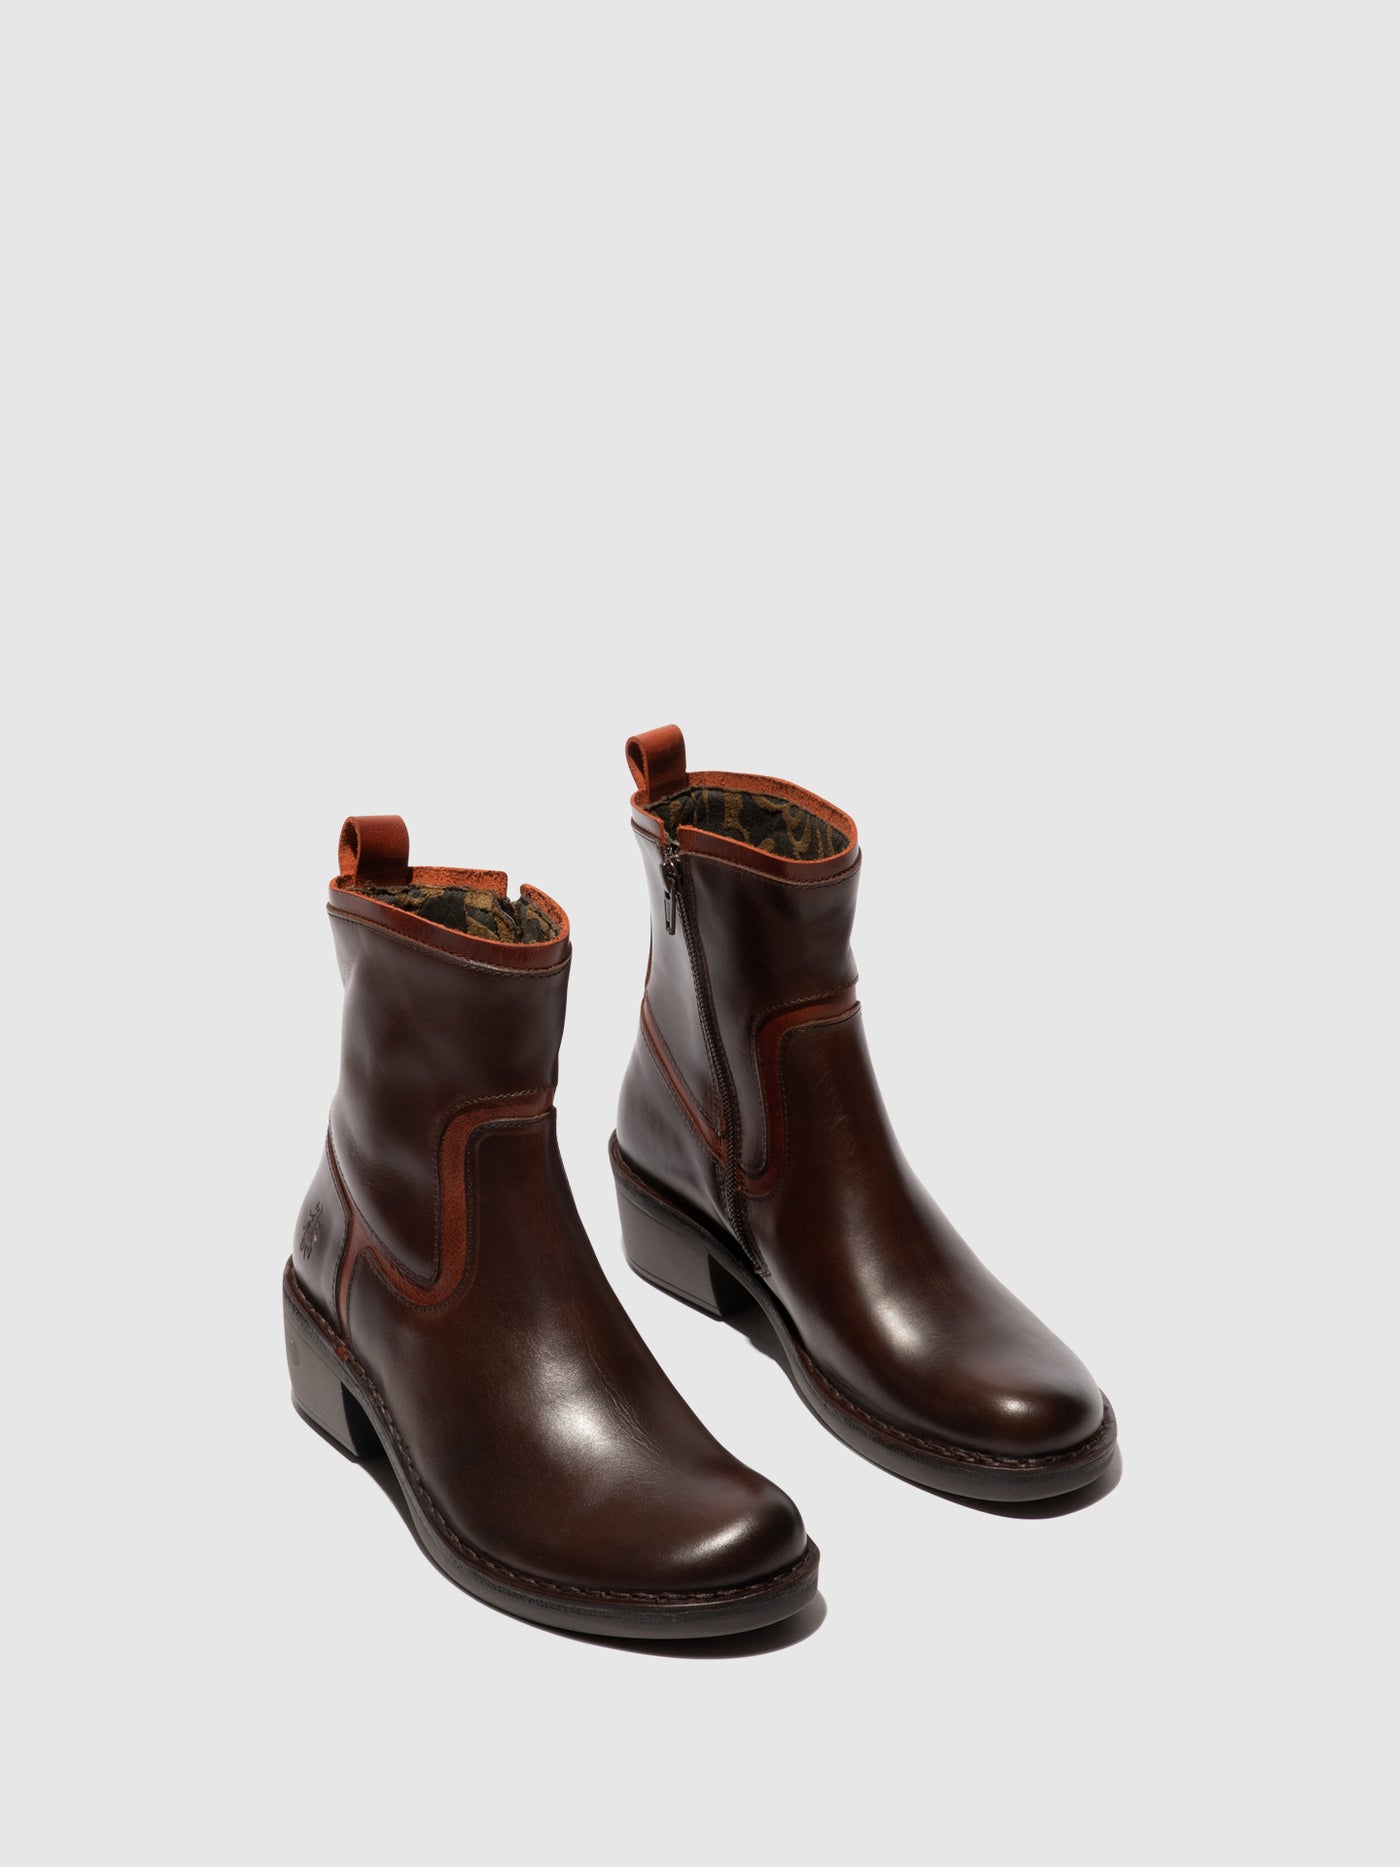 Zip Up Ankle Boots MIZI102FLY DK BROWN/BRICK